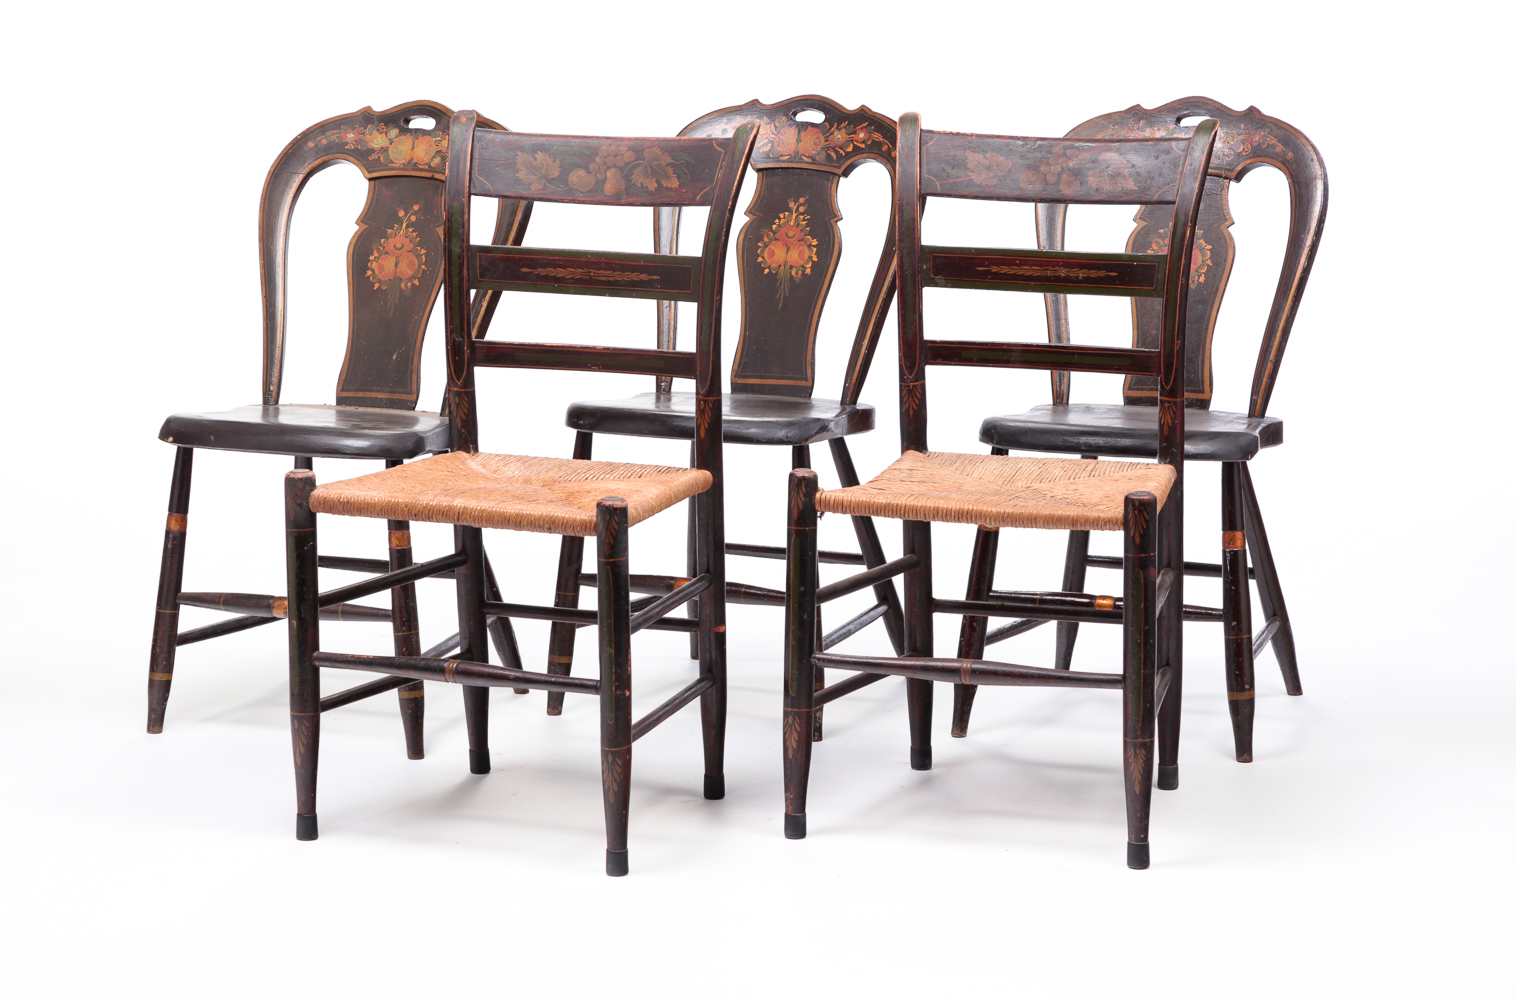 FIVE AMERICAN PAINT DECORATED CHAIRS.